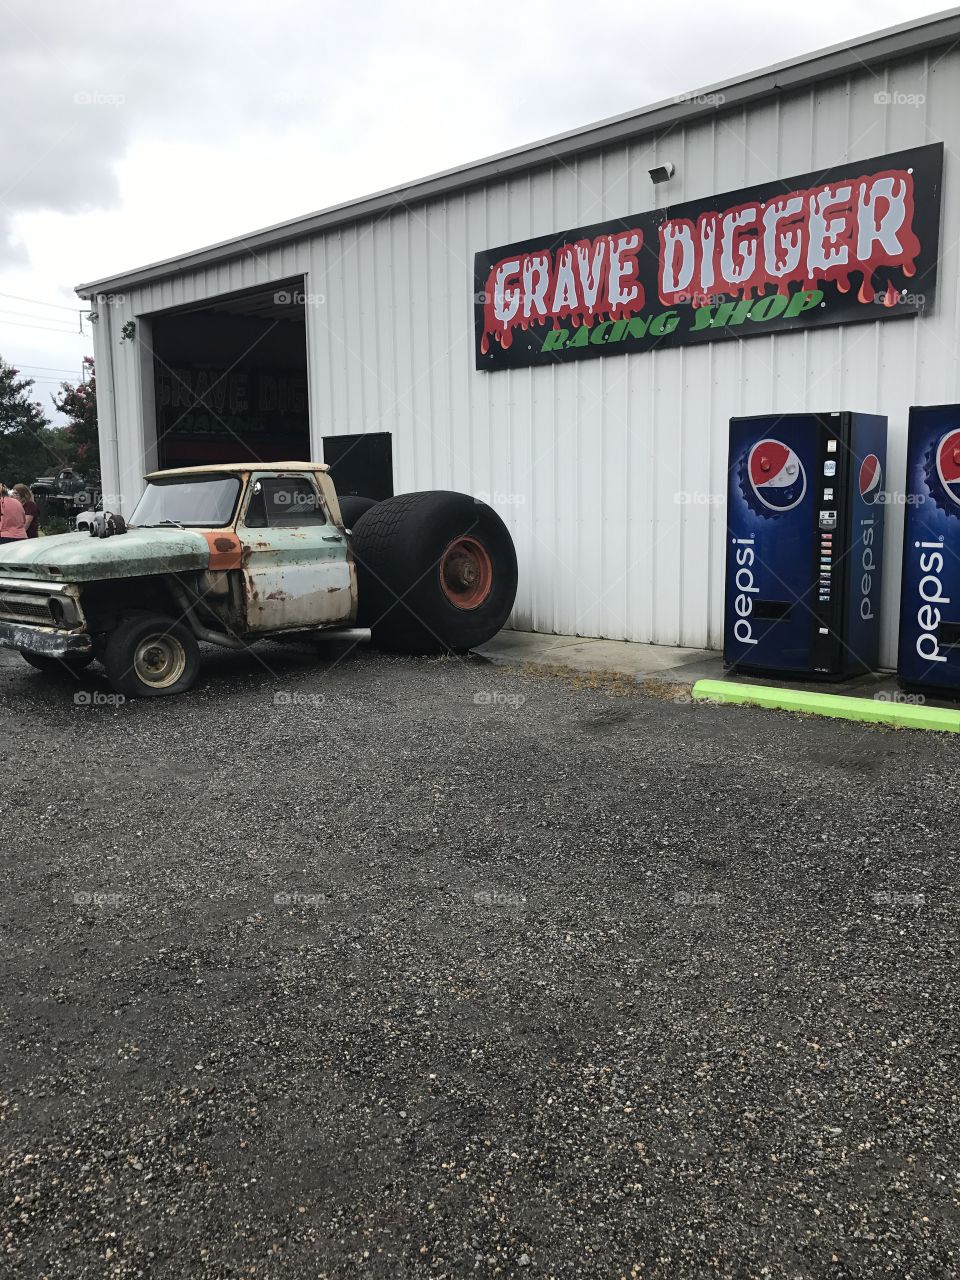 Monster truck diggers dungeon